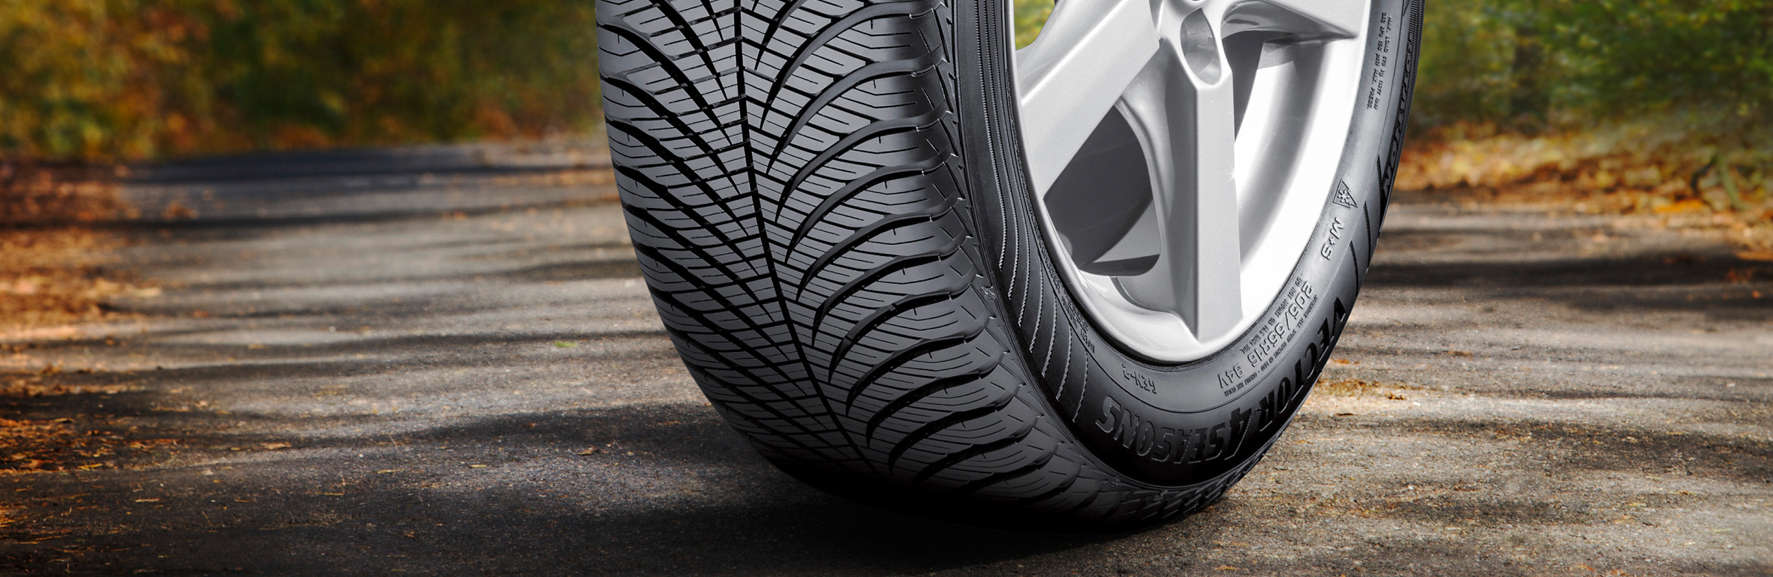 We offer a huge range of alloy wheels and tyres from the top brands